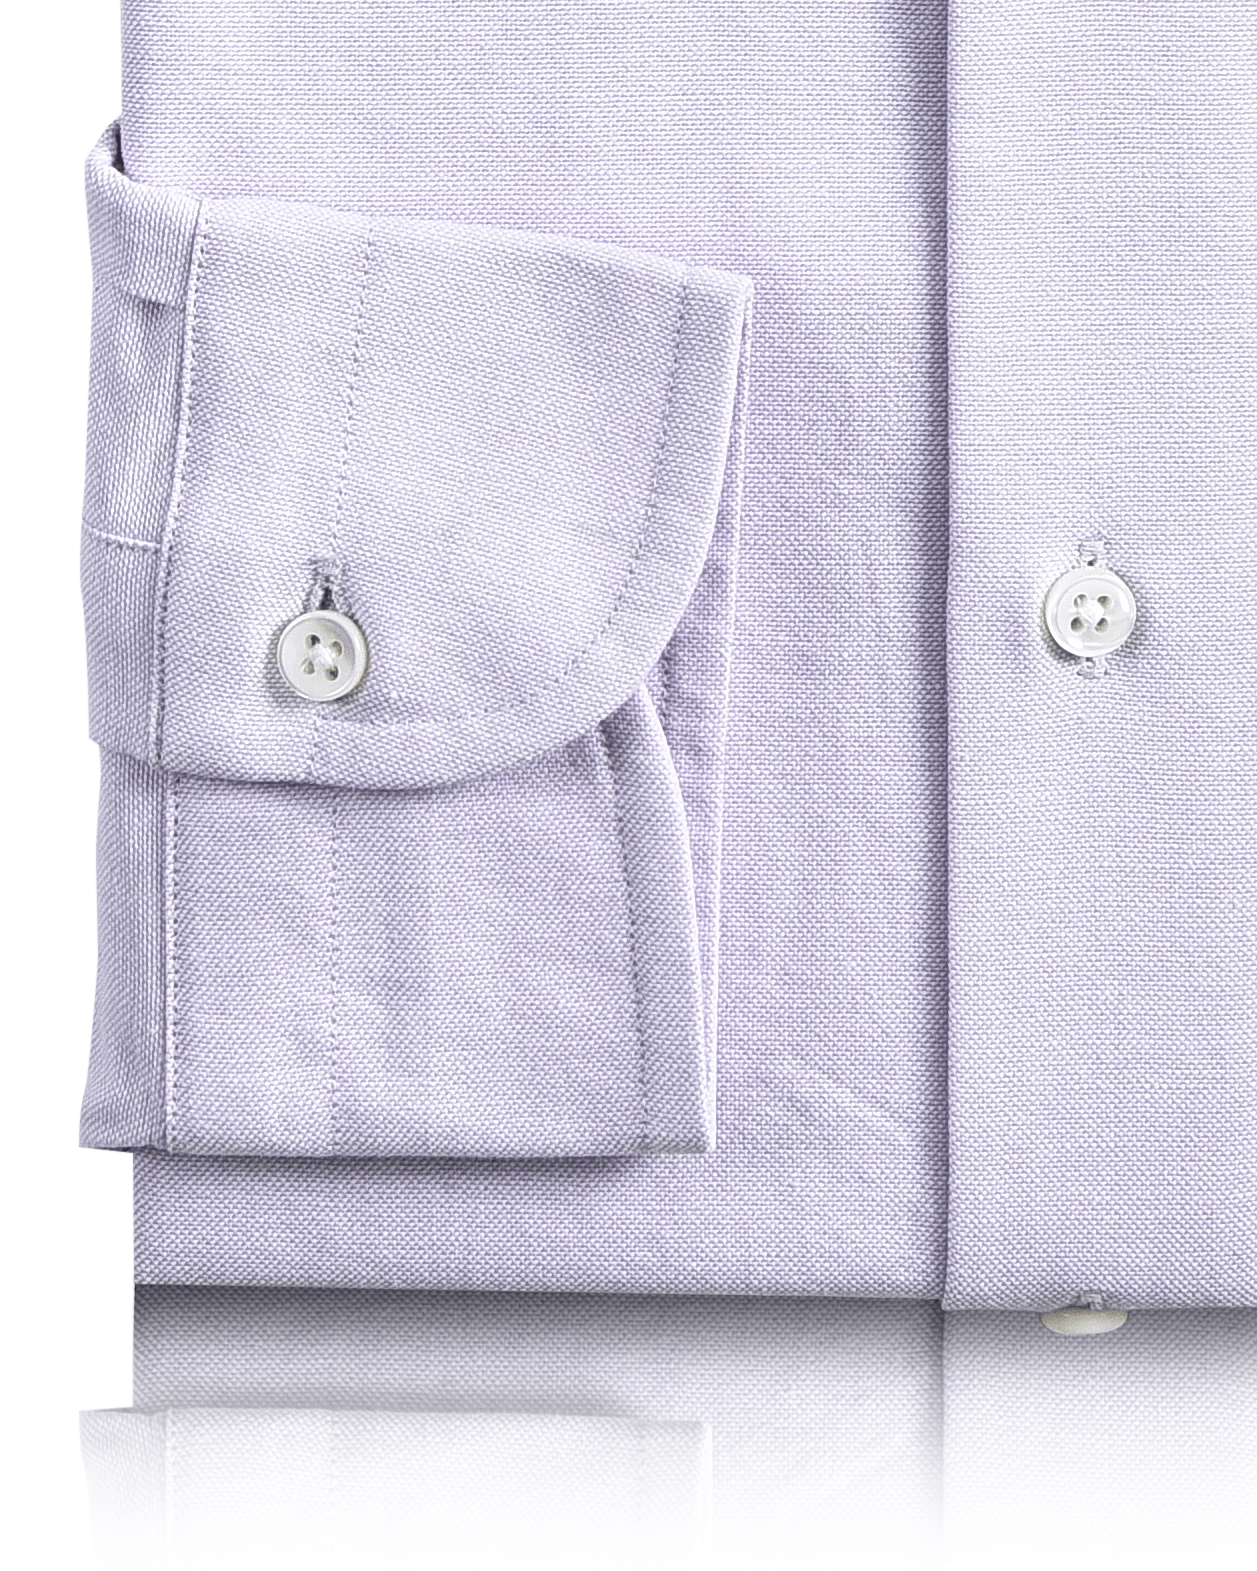 Cuff of the custom oxford shirt for men by Luxire in pale purple